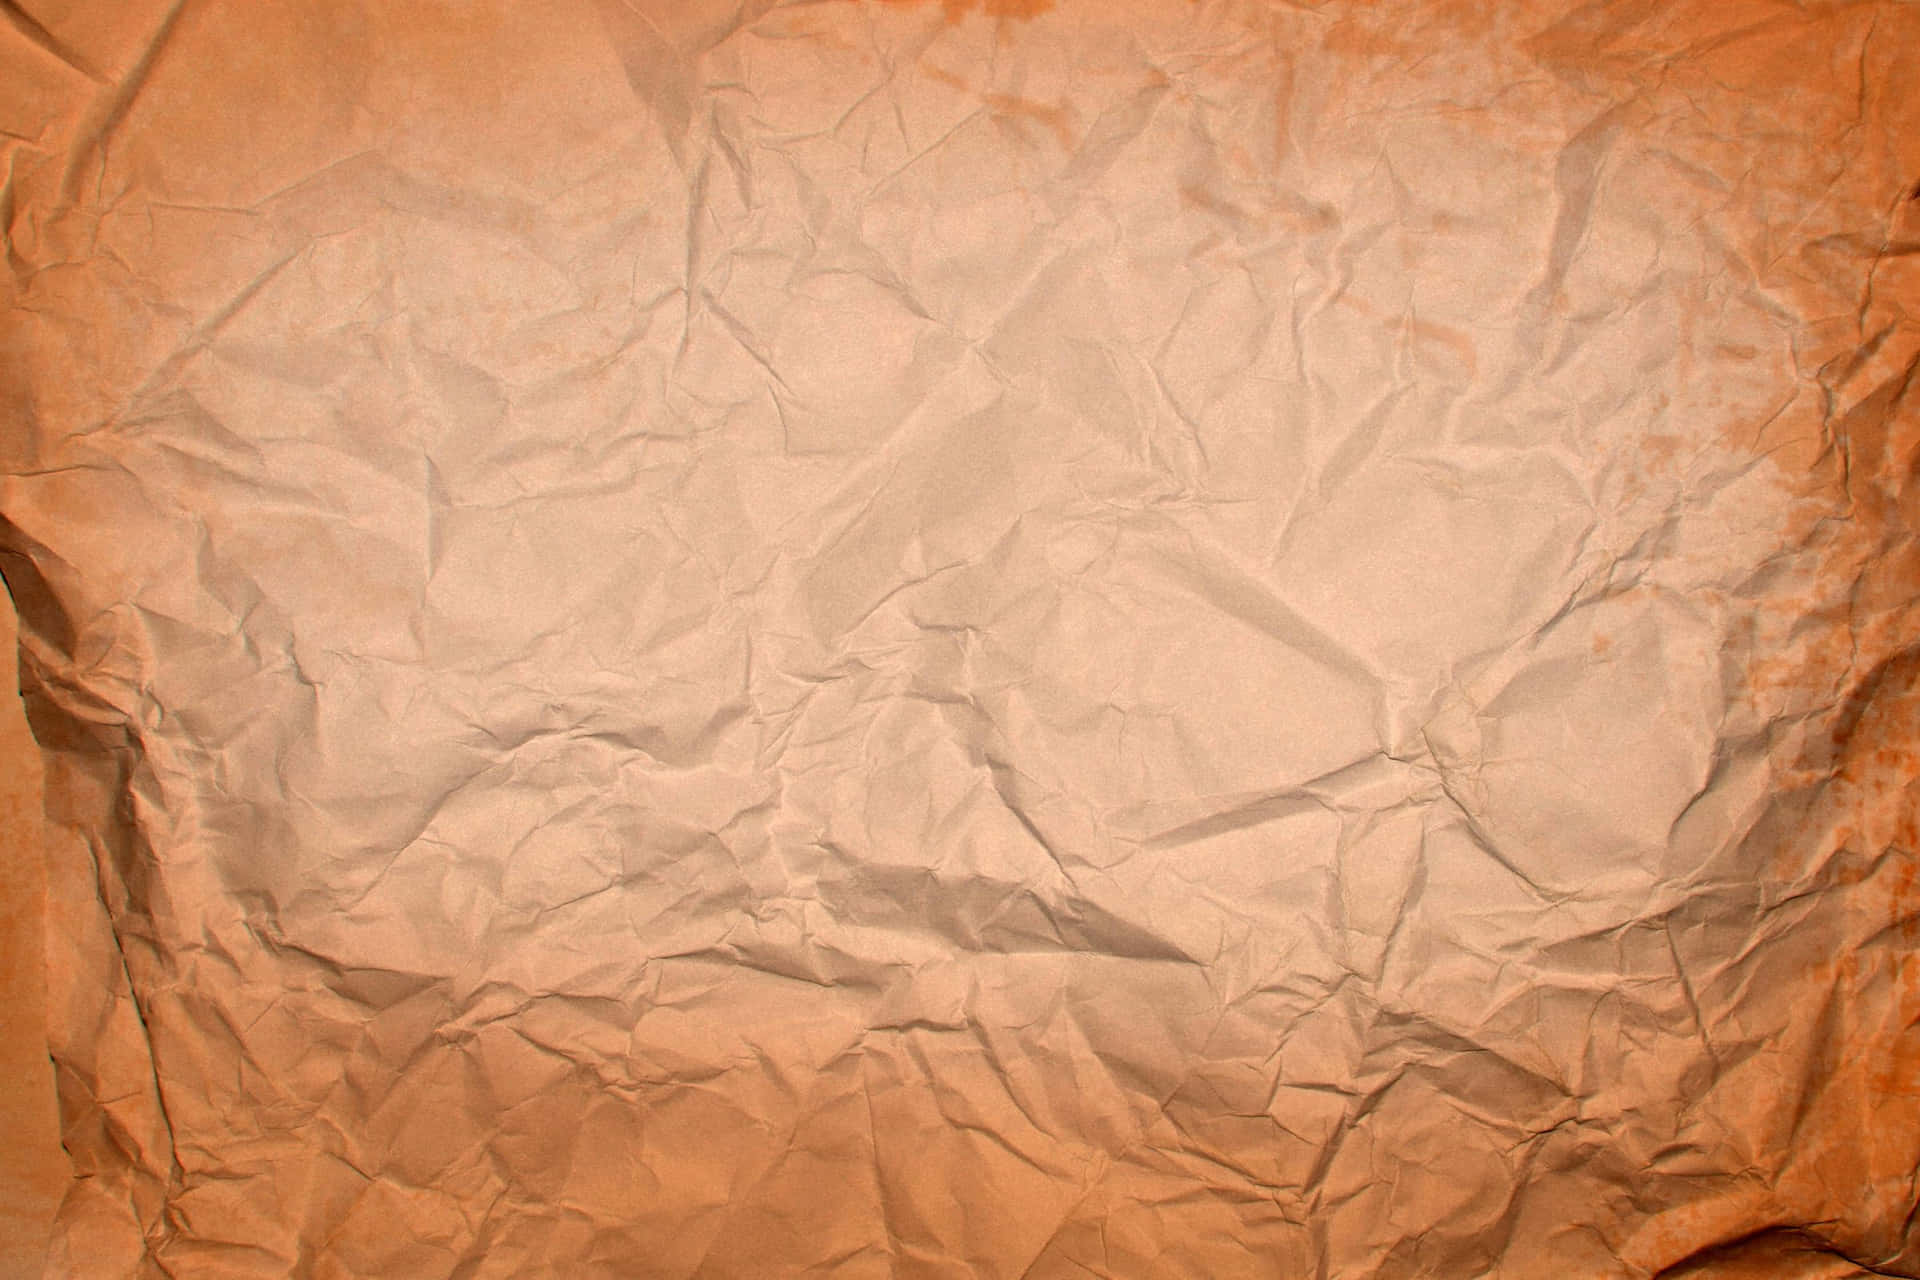 Background Of Crumpled Orange Packaging Paper With Textured Surface,  Wrinkled Texture, Crumpled, Wrinkled Paper Background Image And Wallpaper  for Free Download